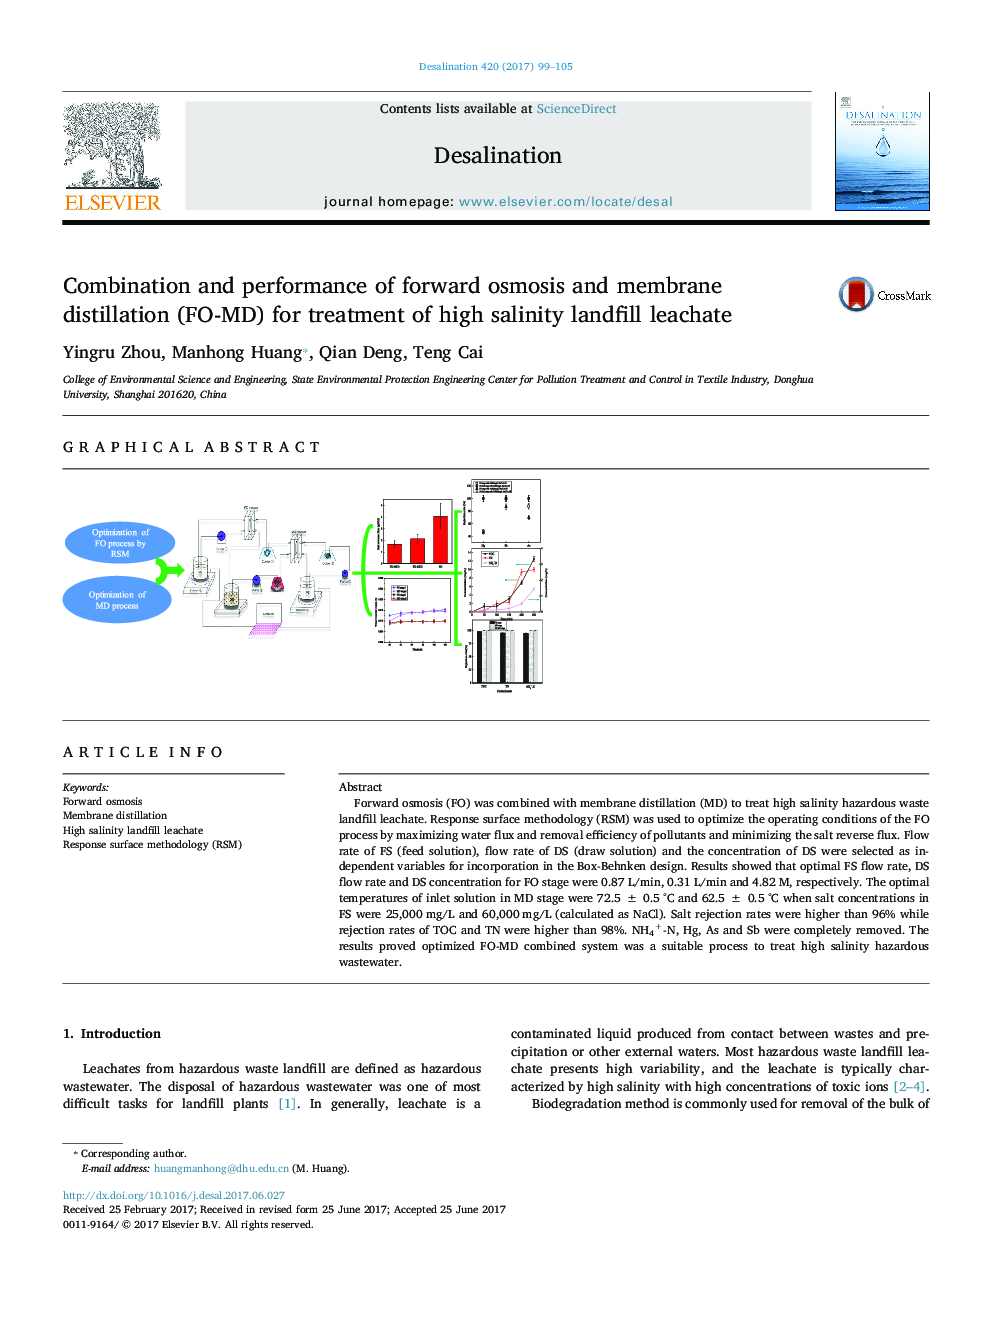 Combination and performance of forward osmosis and membrane distillation (FO-MD) for treatment of high salinity landfill leachate